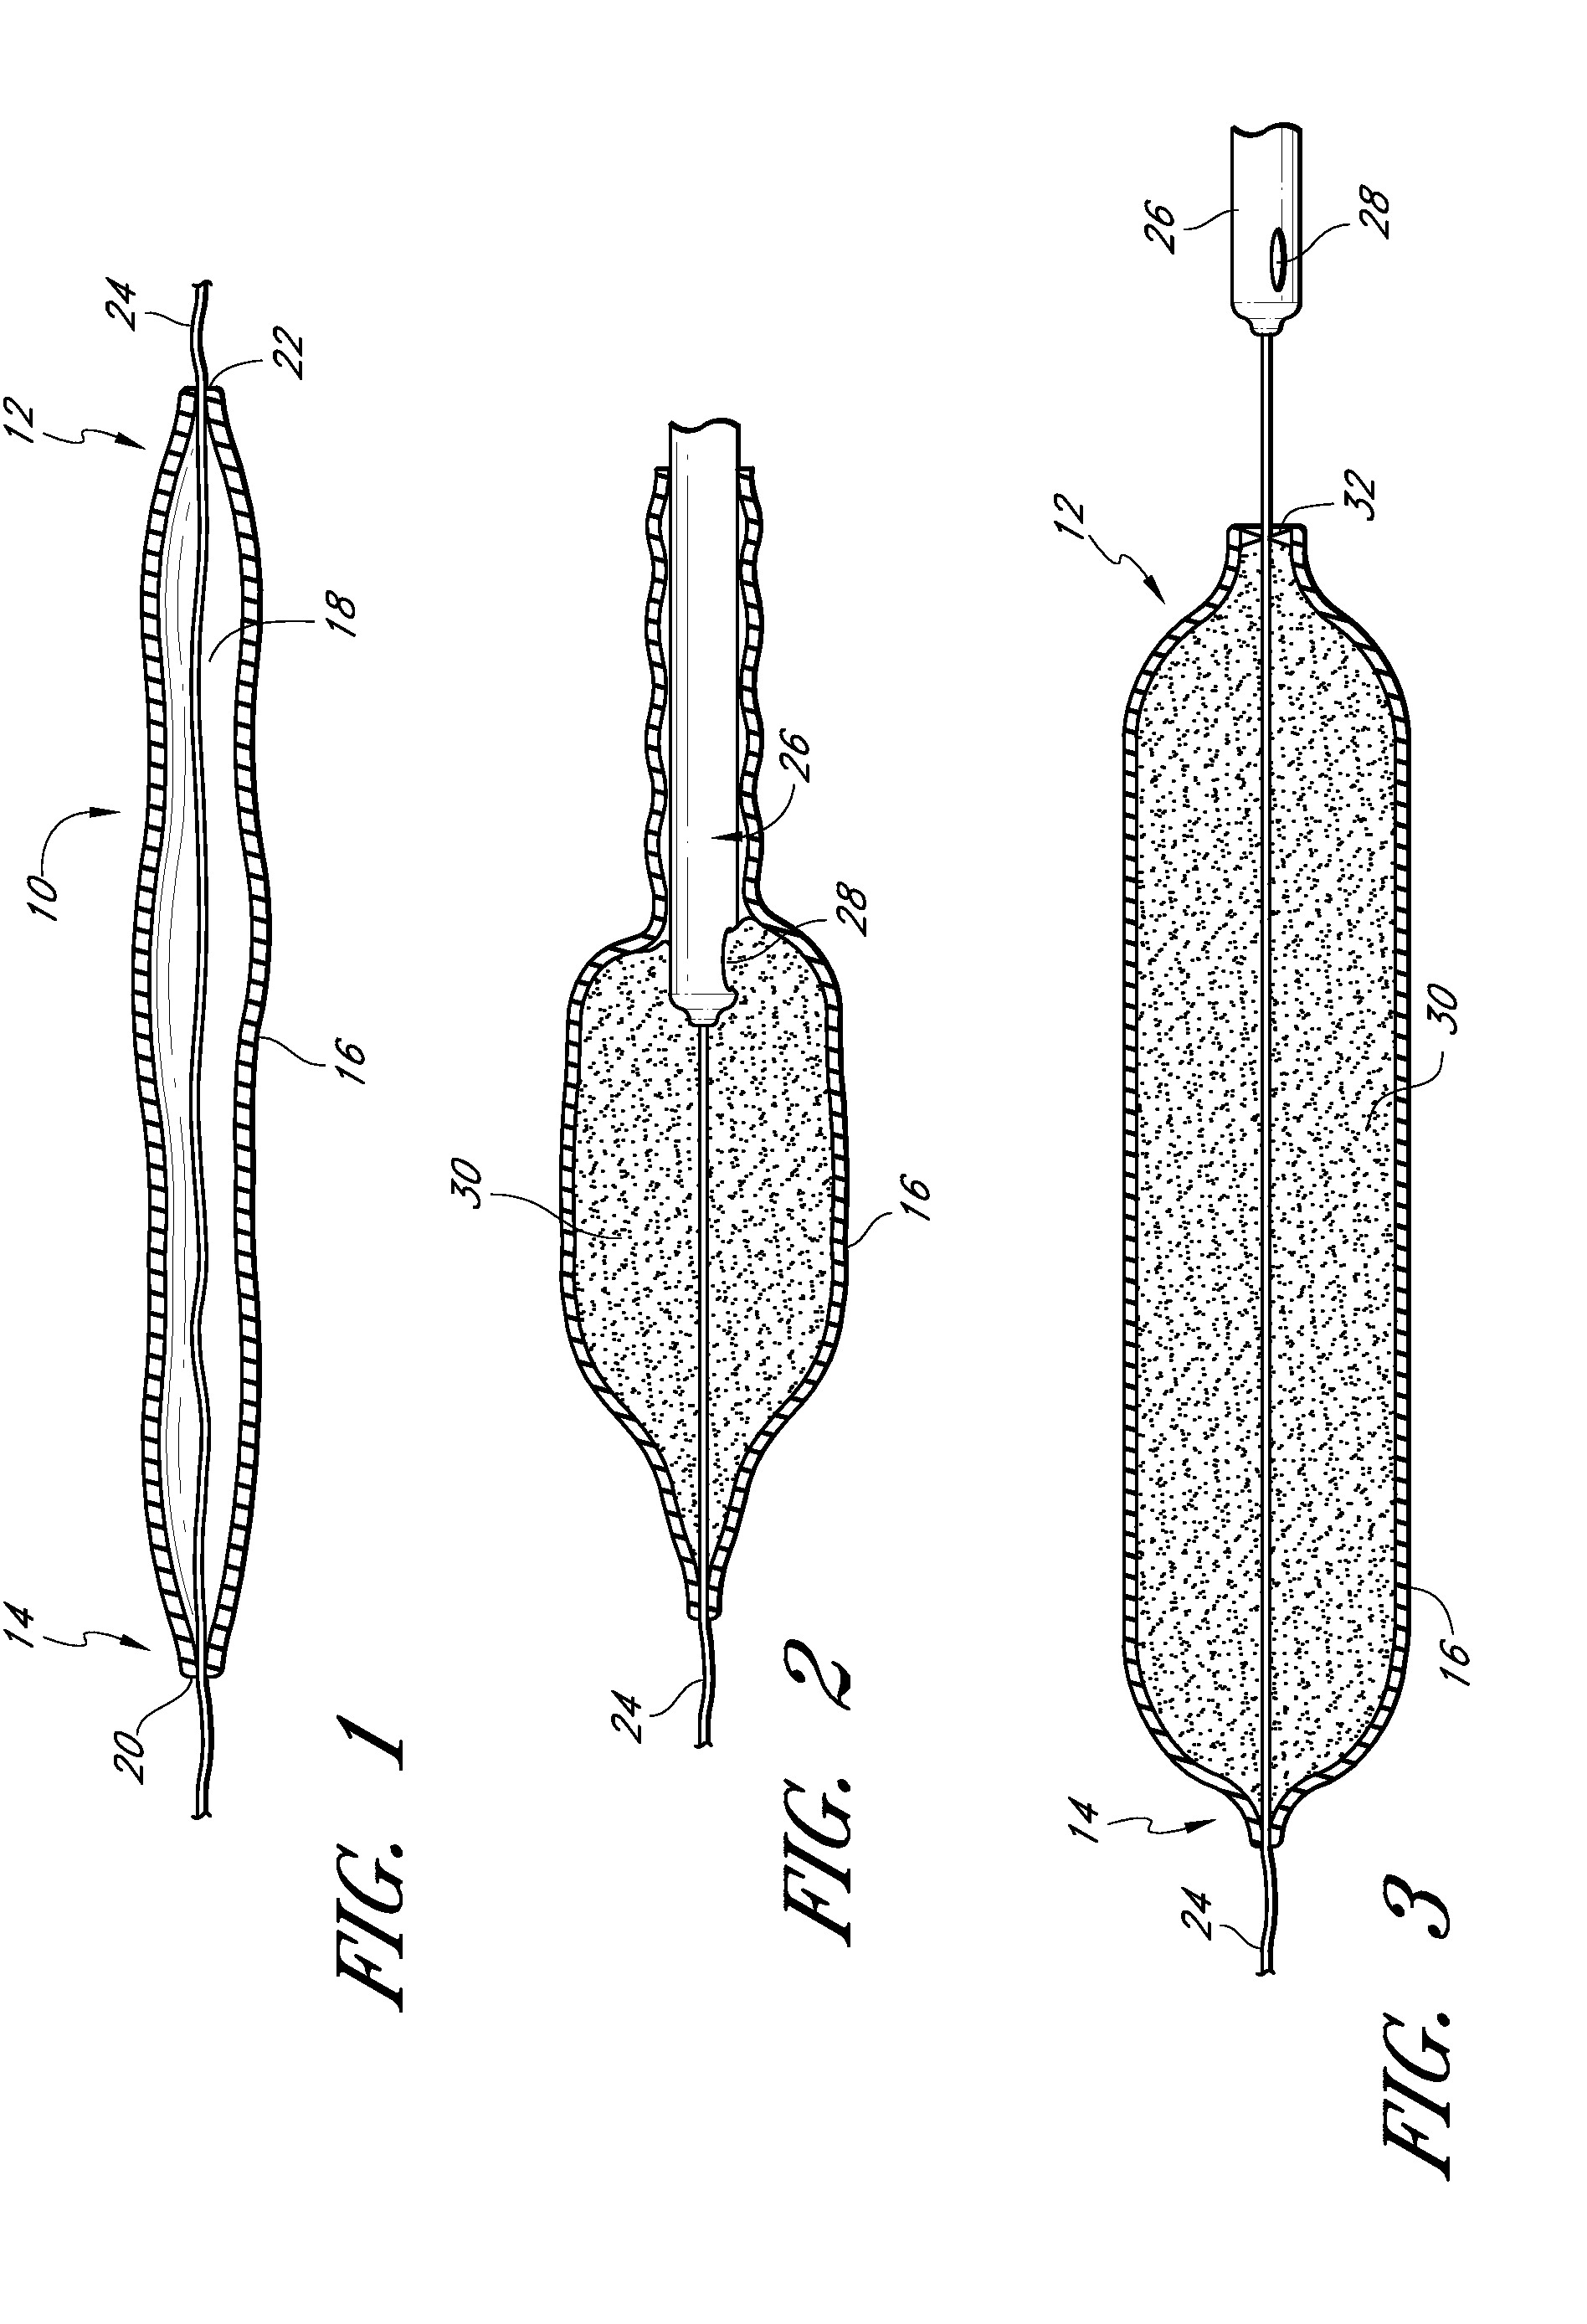 Methods of forming a multilayer tissue implant to create an accordion effect on the outer layer